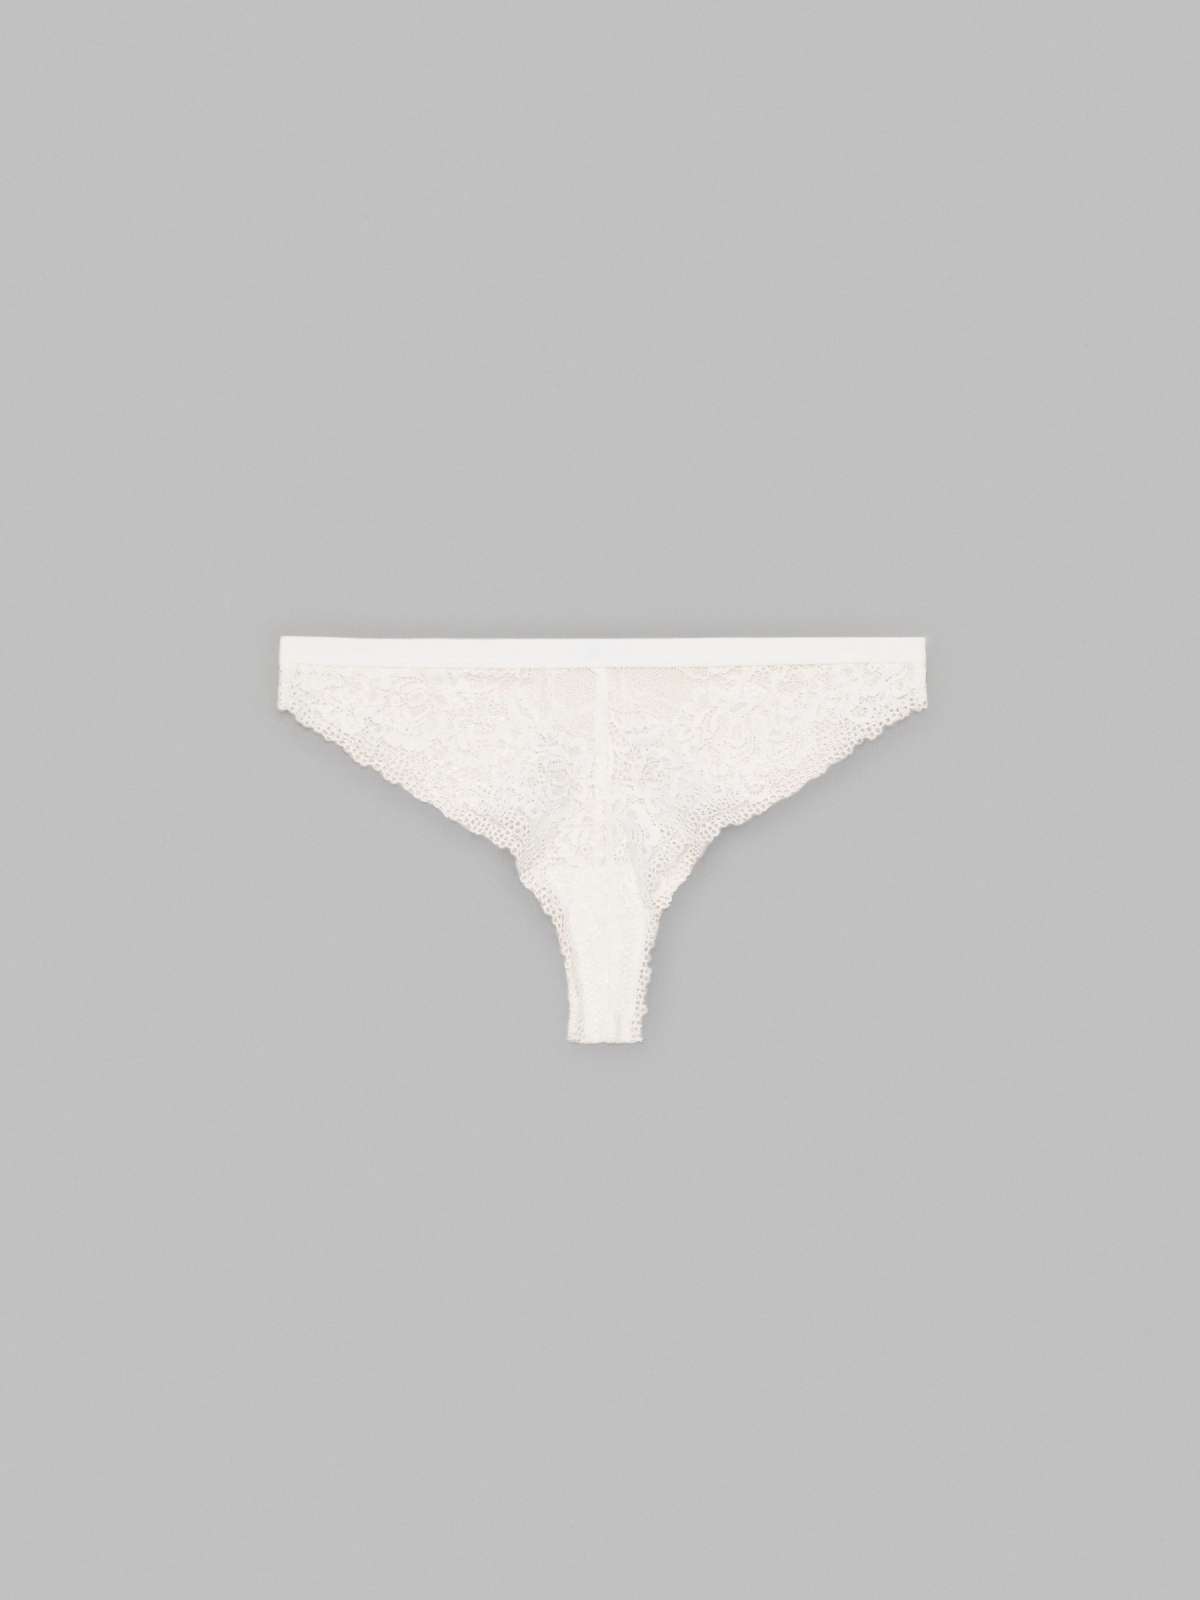 Brazilian white lace panties off white middle back view